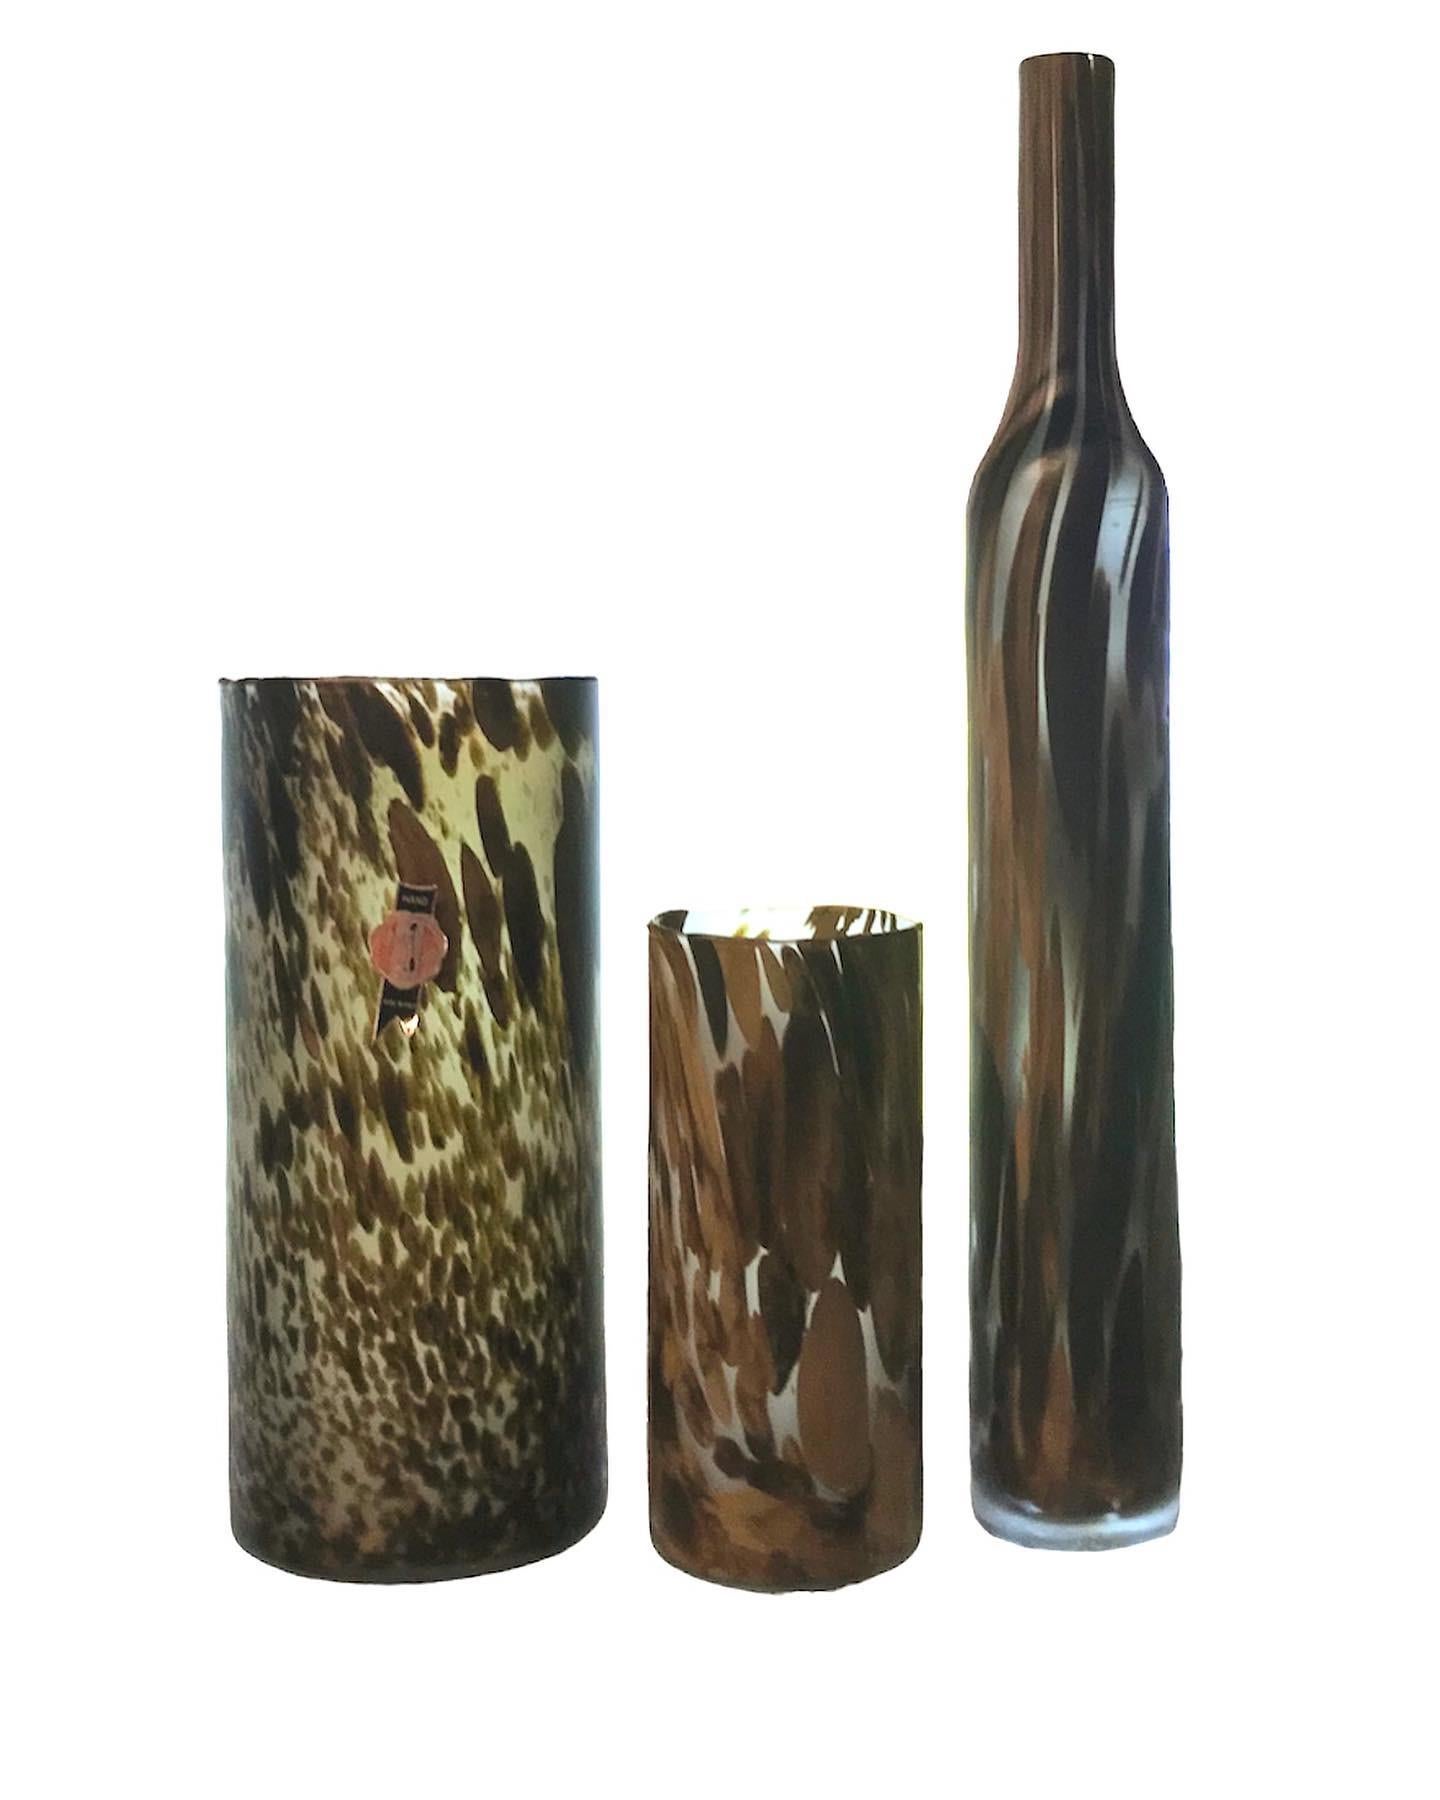 REDUCED FROM $950....Set of 3 mouth blown and hand made opaline glass vessels made in Empoli, Tuscany outside Florence. A lovely striated design with a color palette of muted browns on a matte surface. Classic and elegant, very tall bottle and two